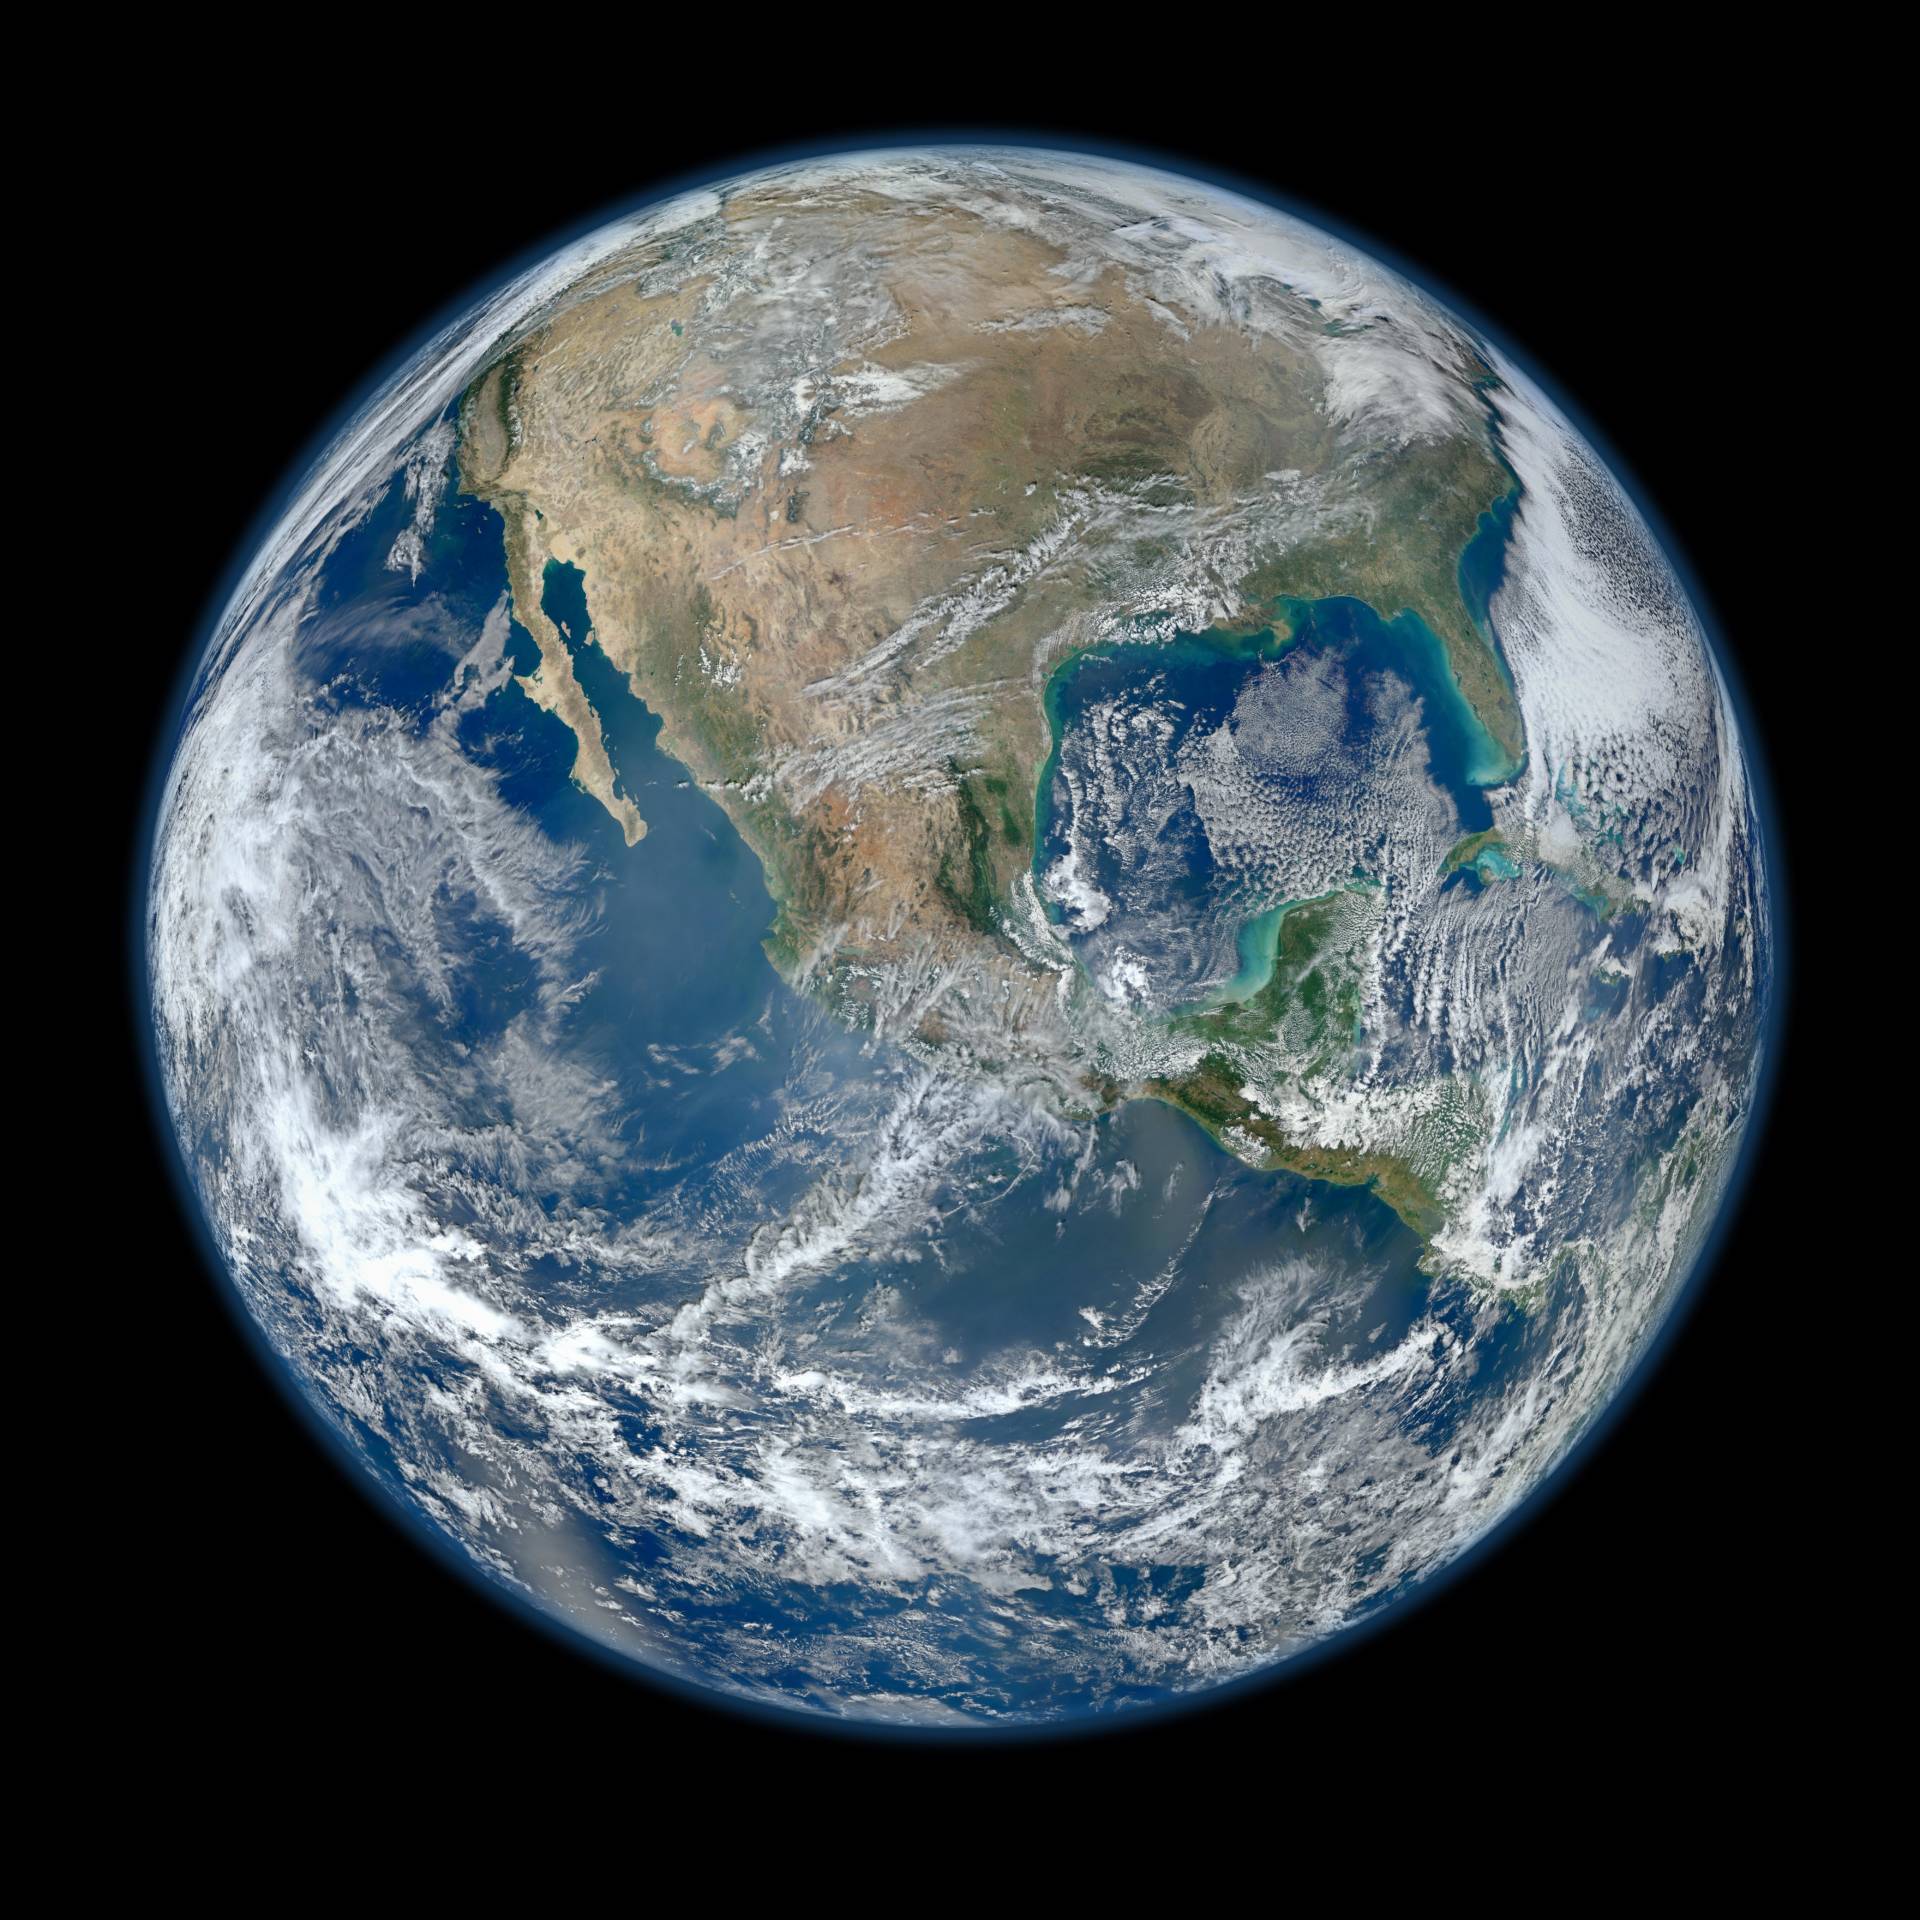 Behold one of the more stunningly detailed images of the Earth yet created. This Blue Marble Earth montage, created from photographs taken by the VIIRS instrument on board the Suomi NPP satellite, shows many stunning details of our home planet. NASA